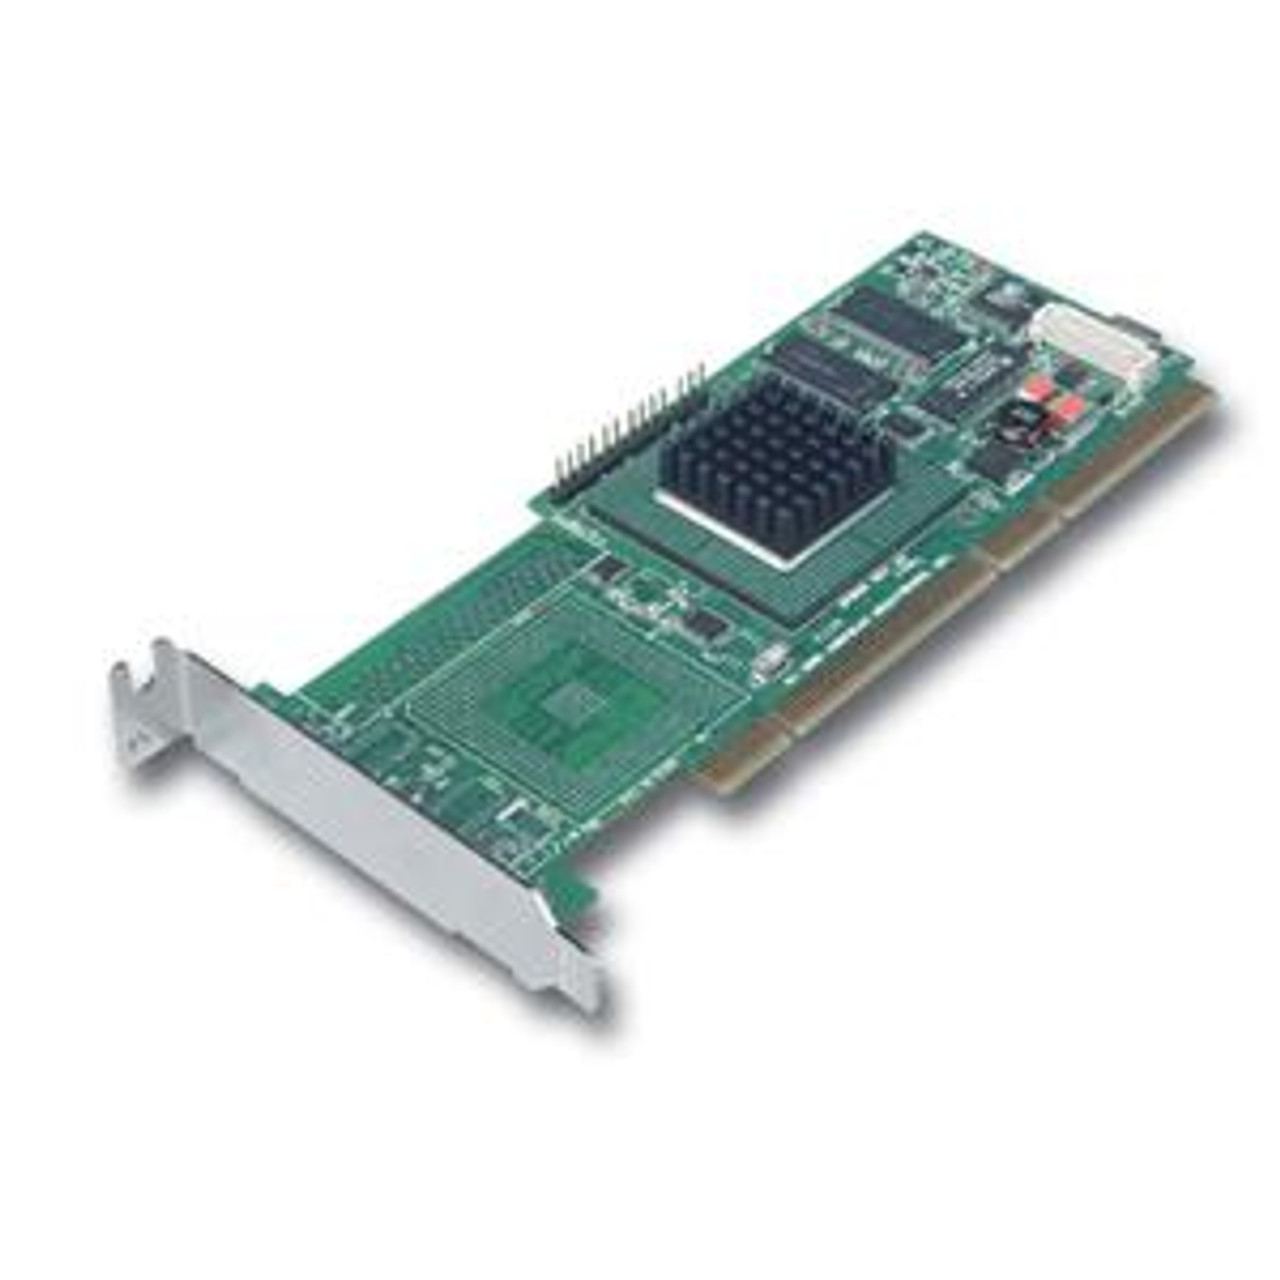 225338-B21 - HP Smart Array 532 Dual Channel Ultra320 66MHz 64Bit 68-Pin 32MB Cache PCI SCSI Array Controller Card